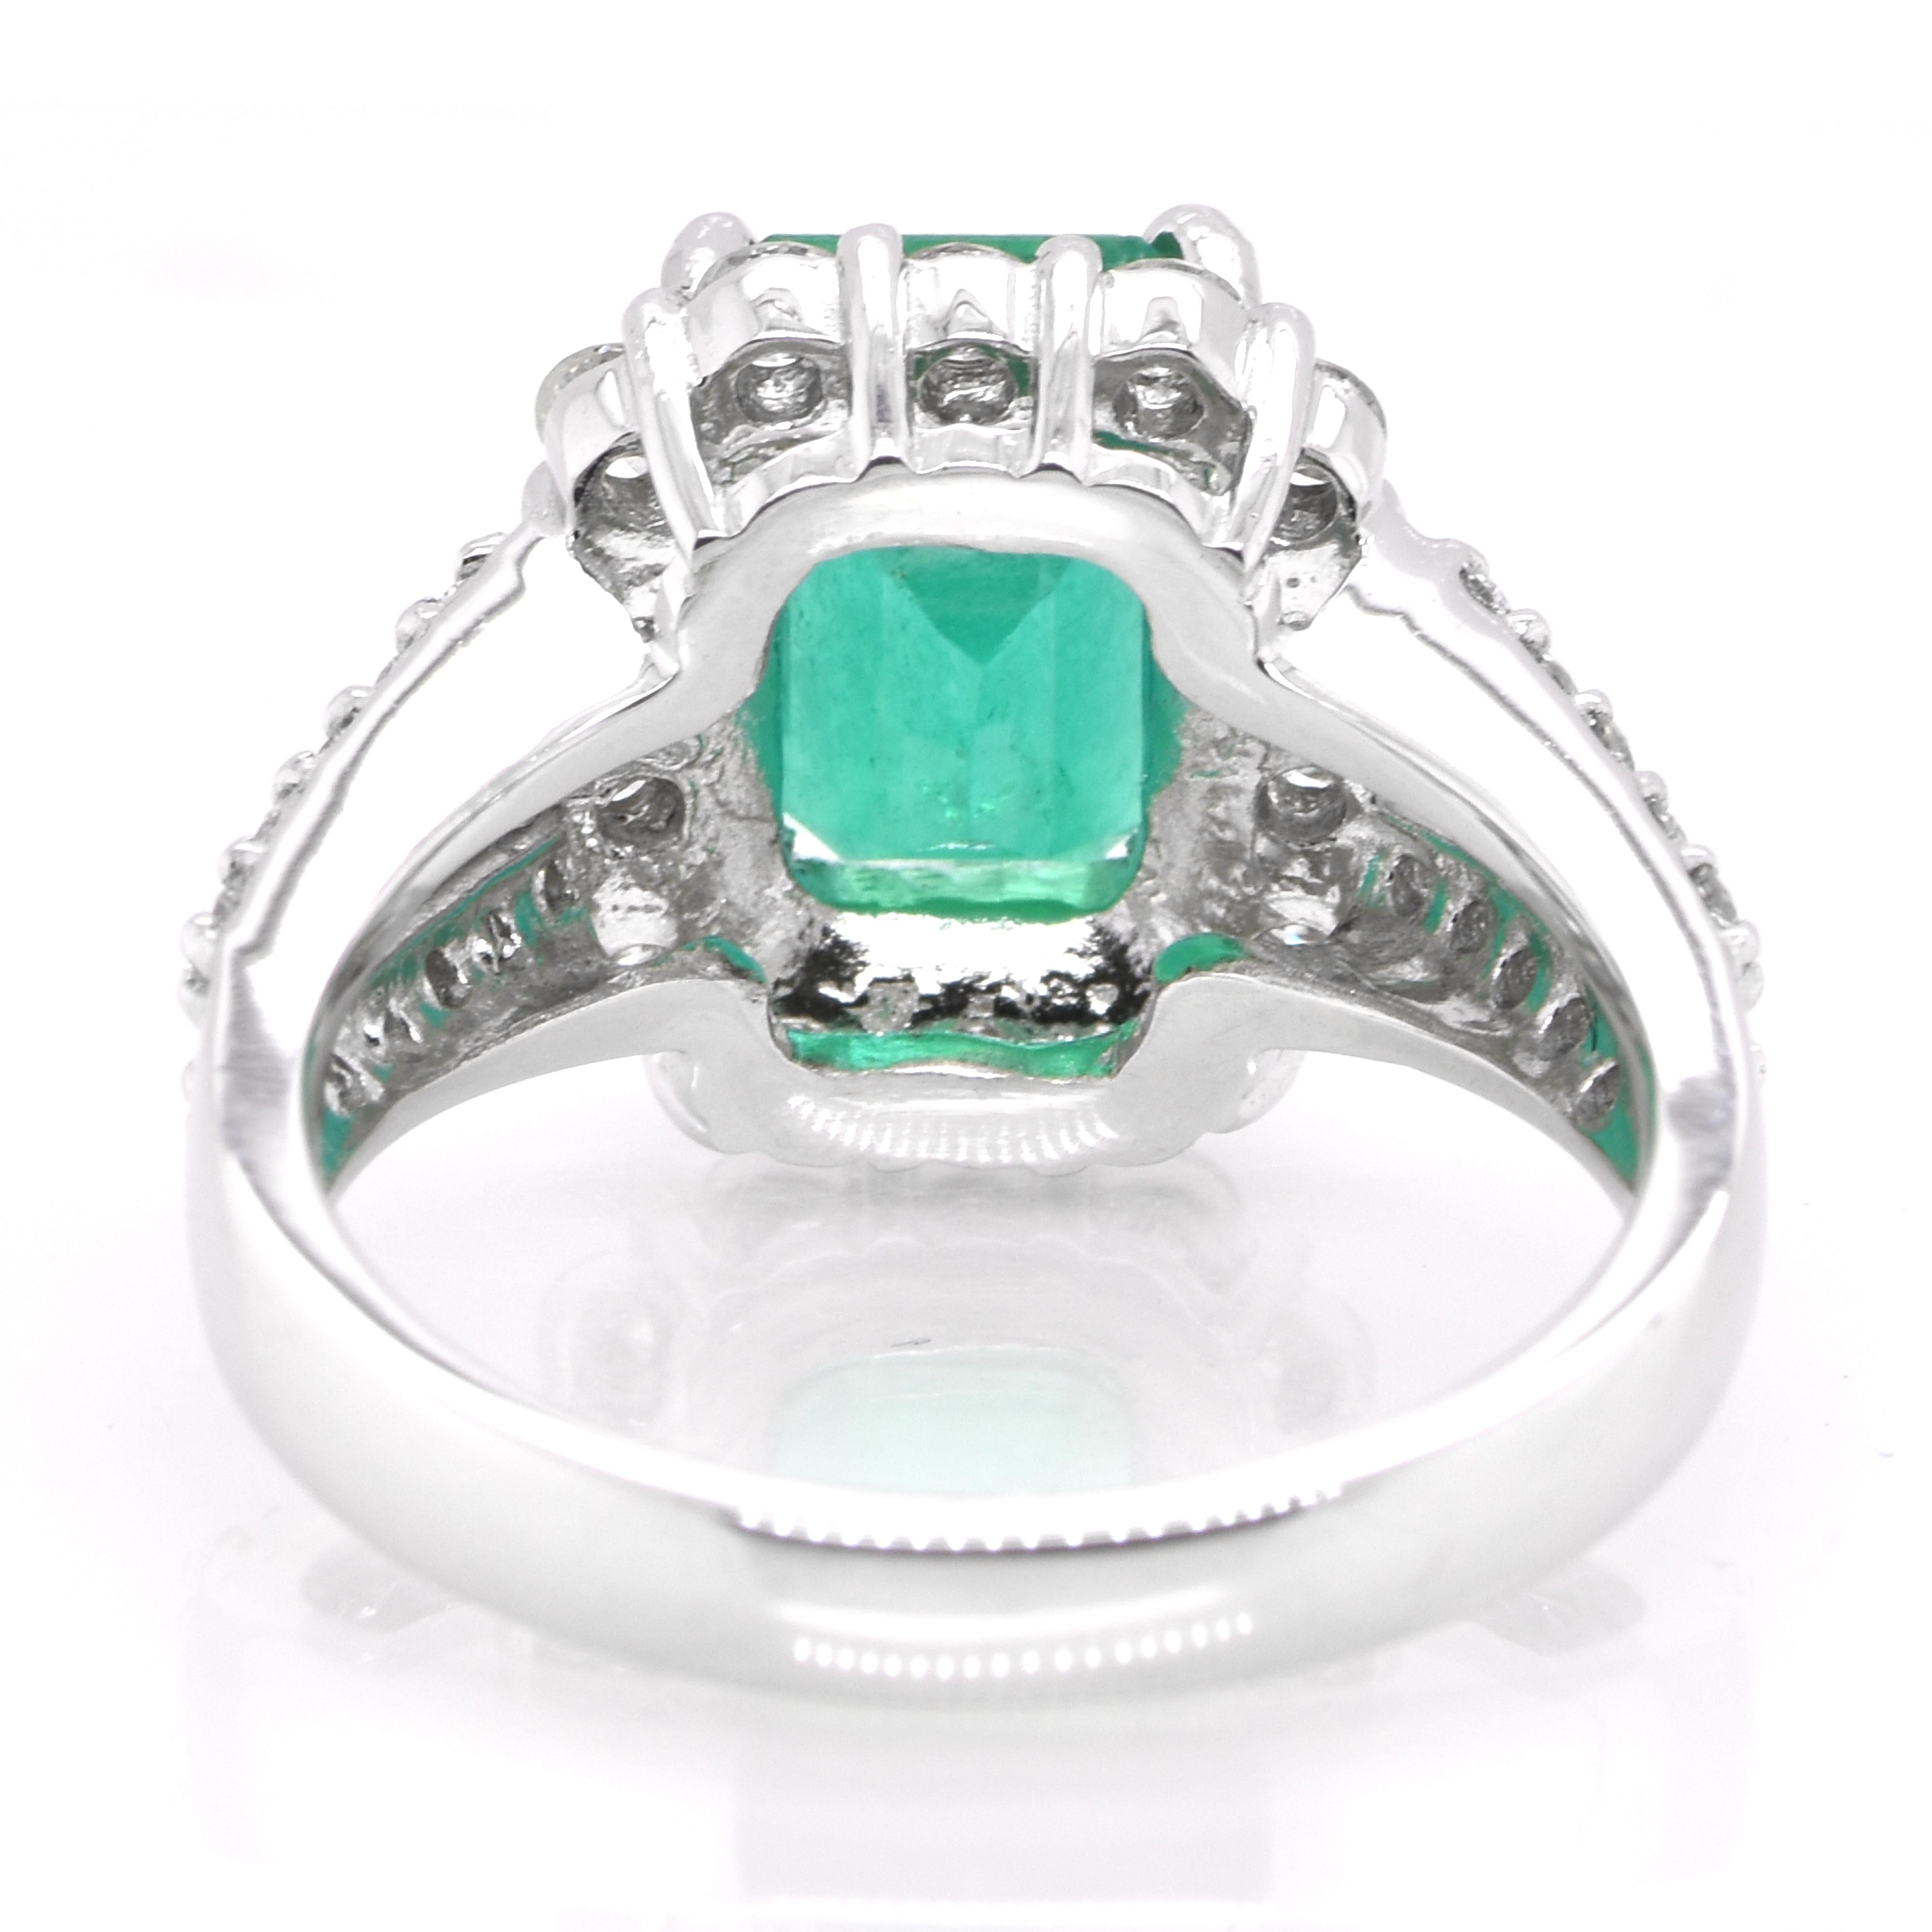 Women's 2.49 Carat Colombian Emerald and Diamond Ring Set in Platinum For Sale